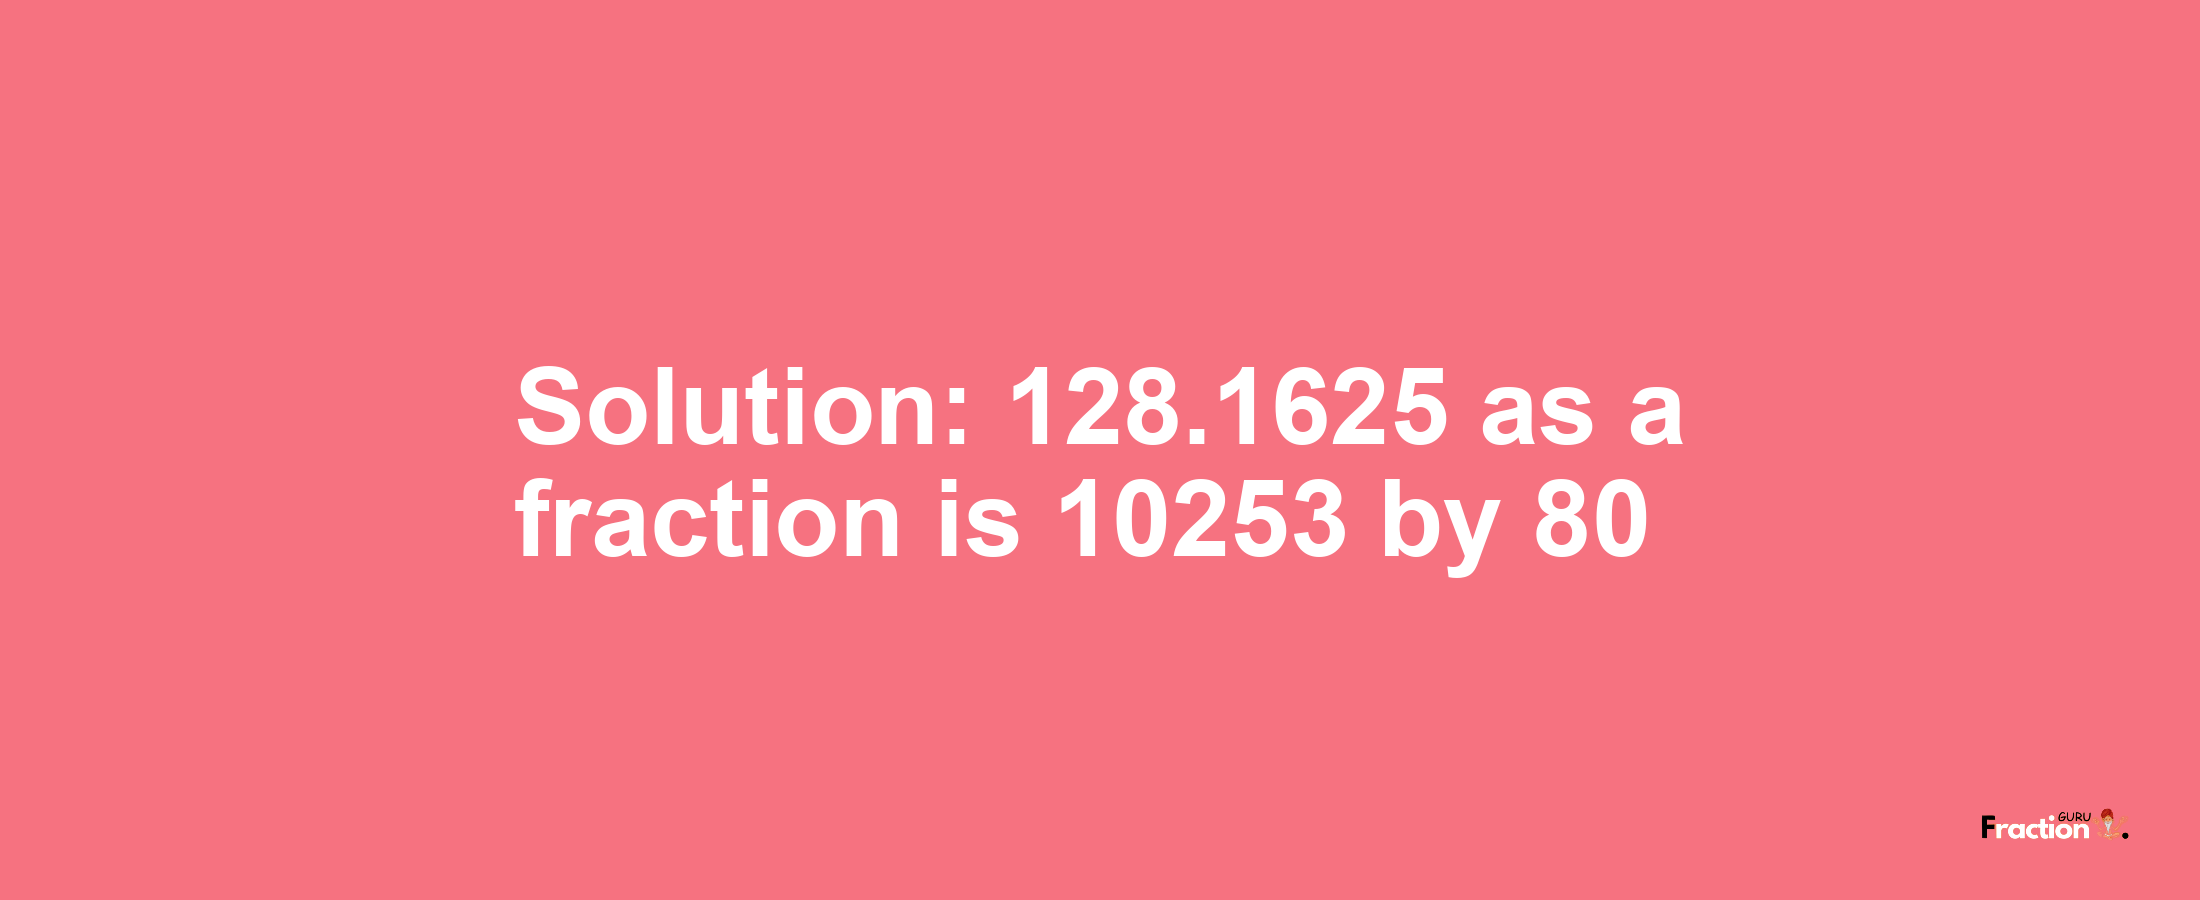 Solution:128.1625 as a fraction is 10253/80